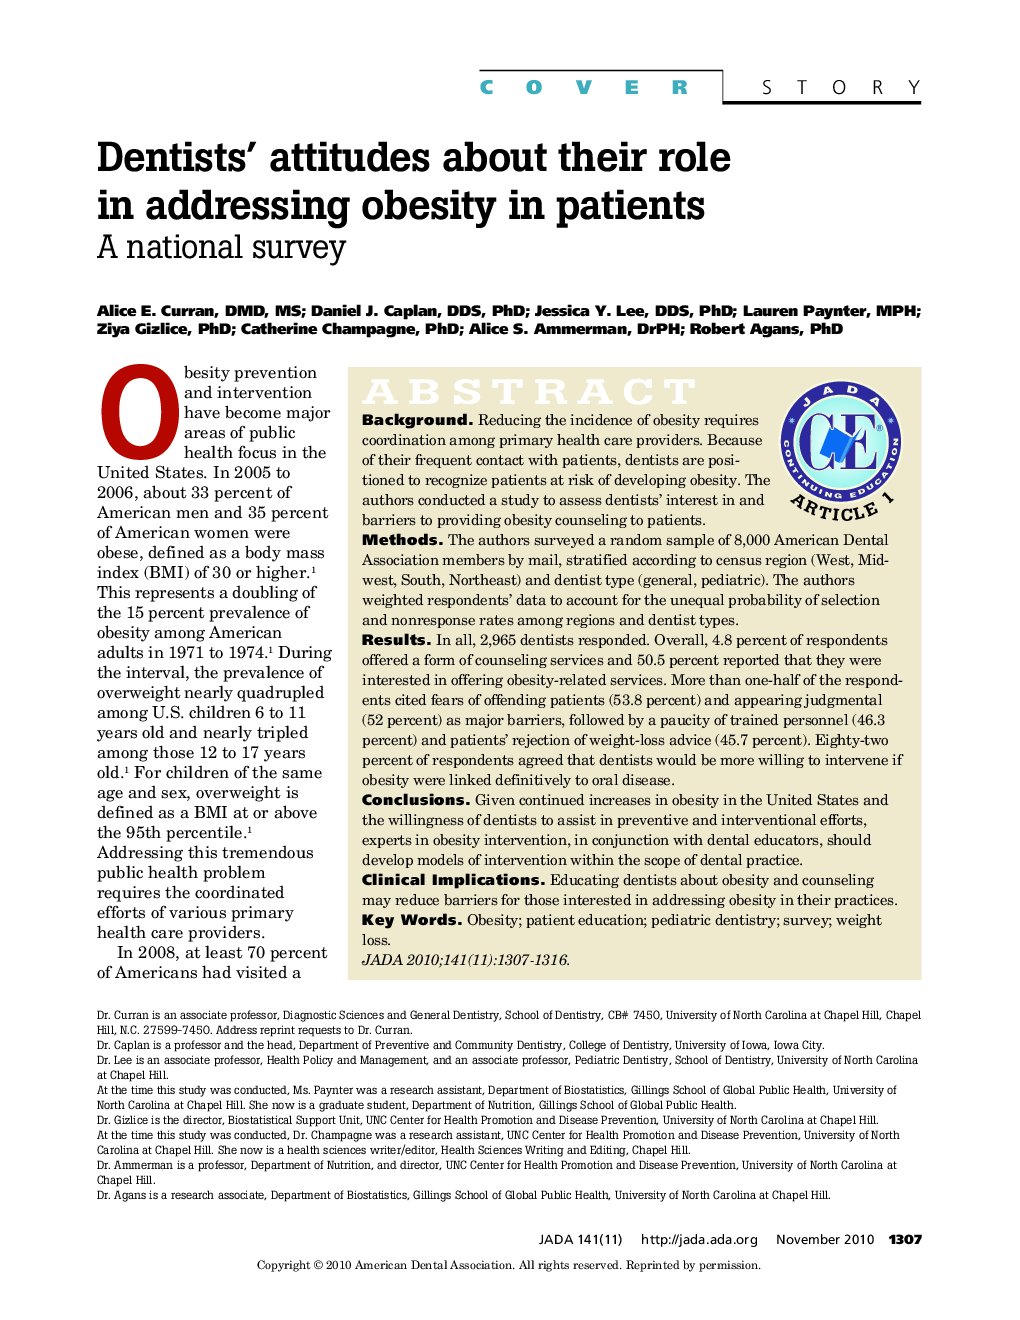 Dentists' Attitudes About Their Role in Addressing Obesity in Patients : A national survey